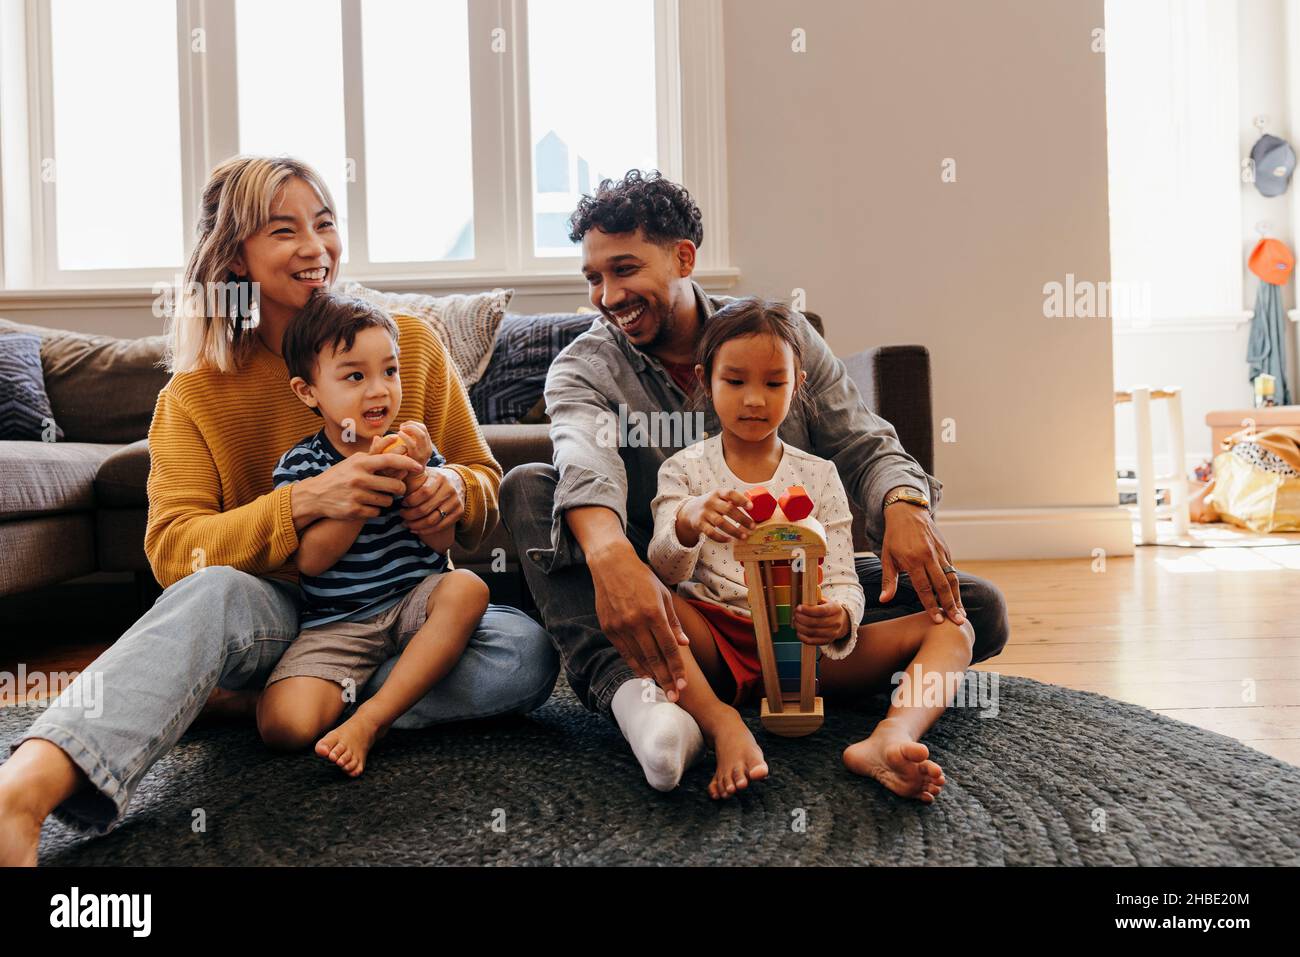 Two young parents playing with their son and daughter in the living room. Mom and dad having fun with their kids during playtime. Family of four spend Stock Photo